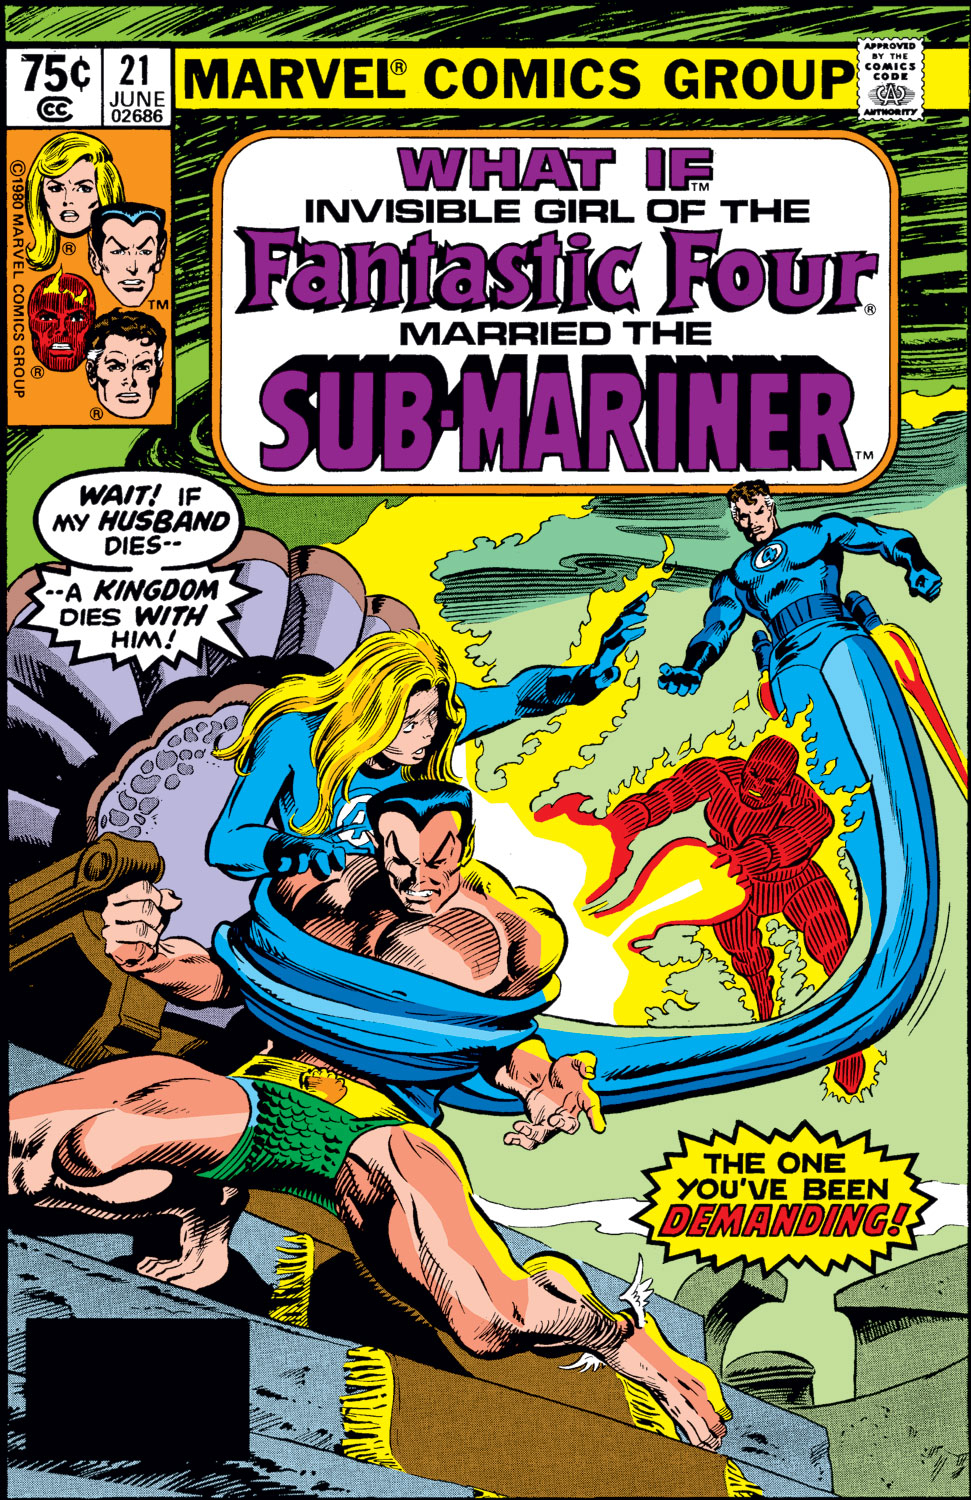 What If? (1977) issue 21 - Invisible Girl of the Fantastic Four married the Sub-Mariner - Page 1